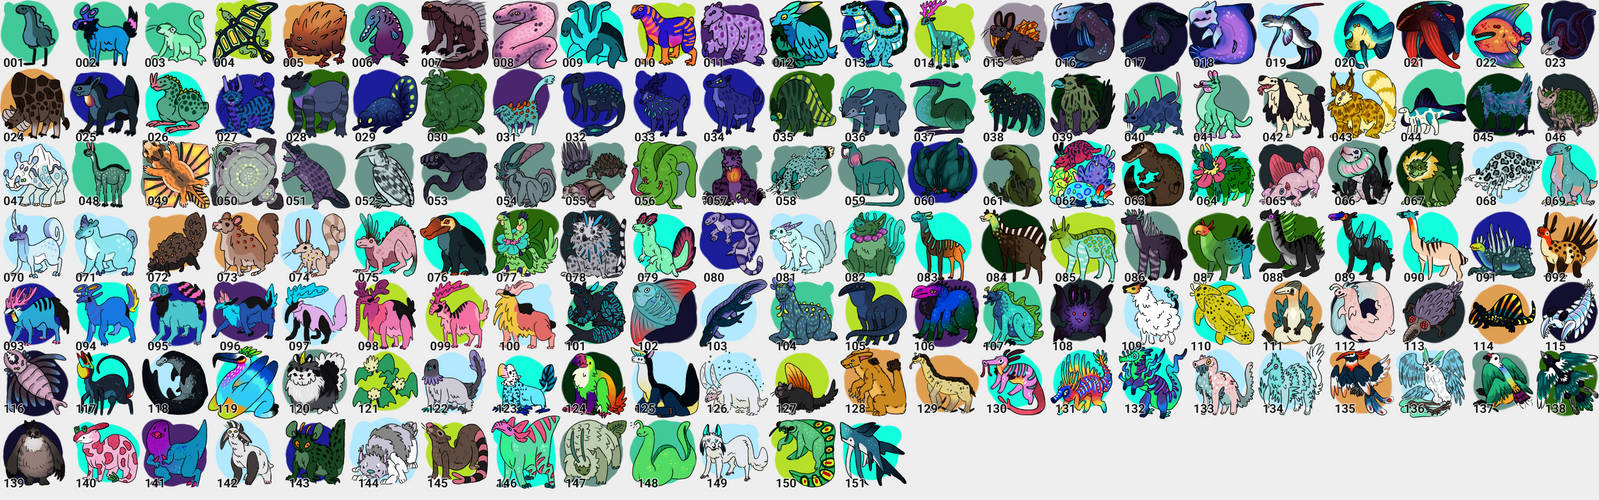 151 Critters